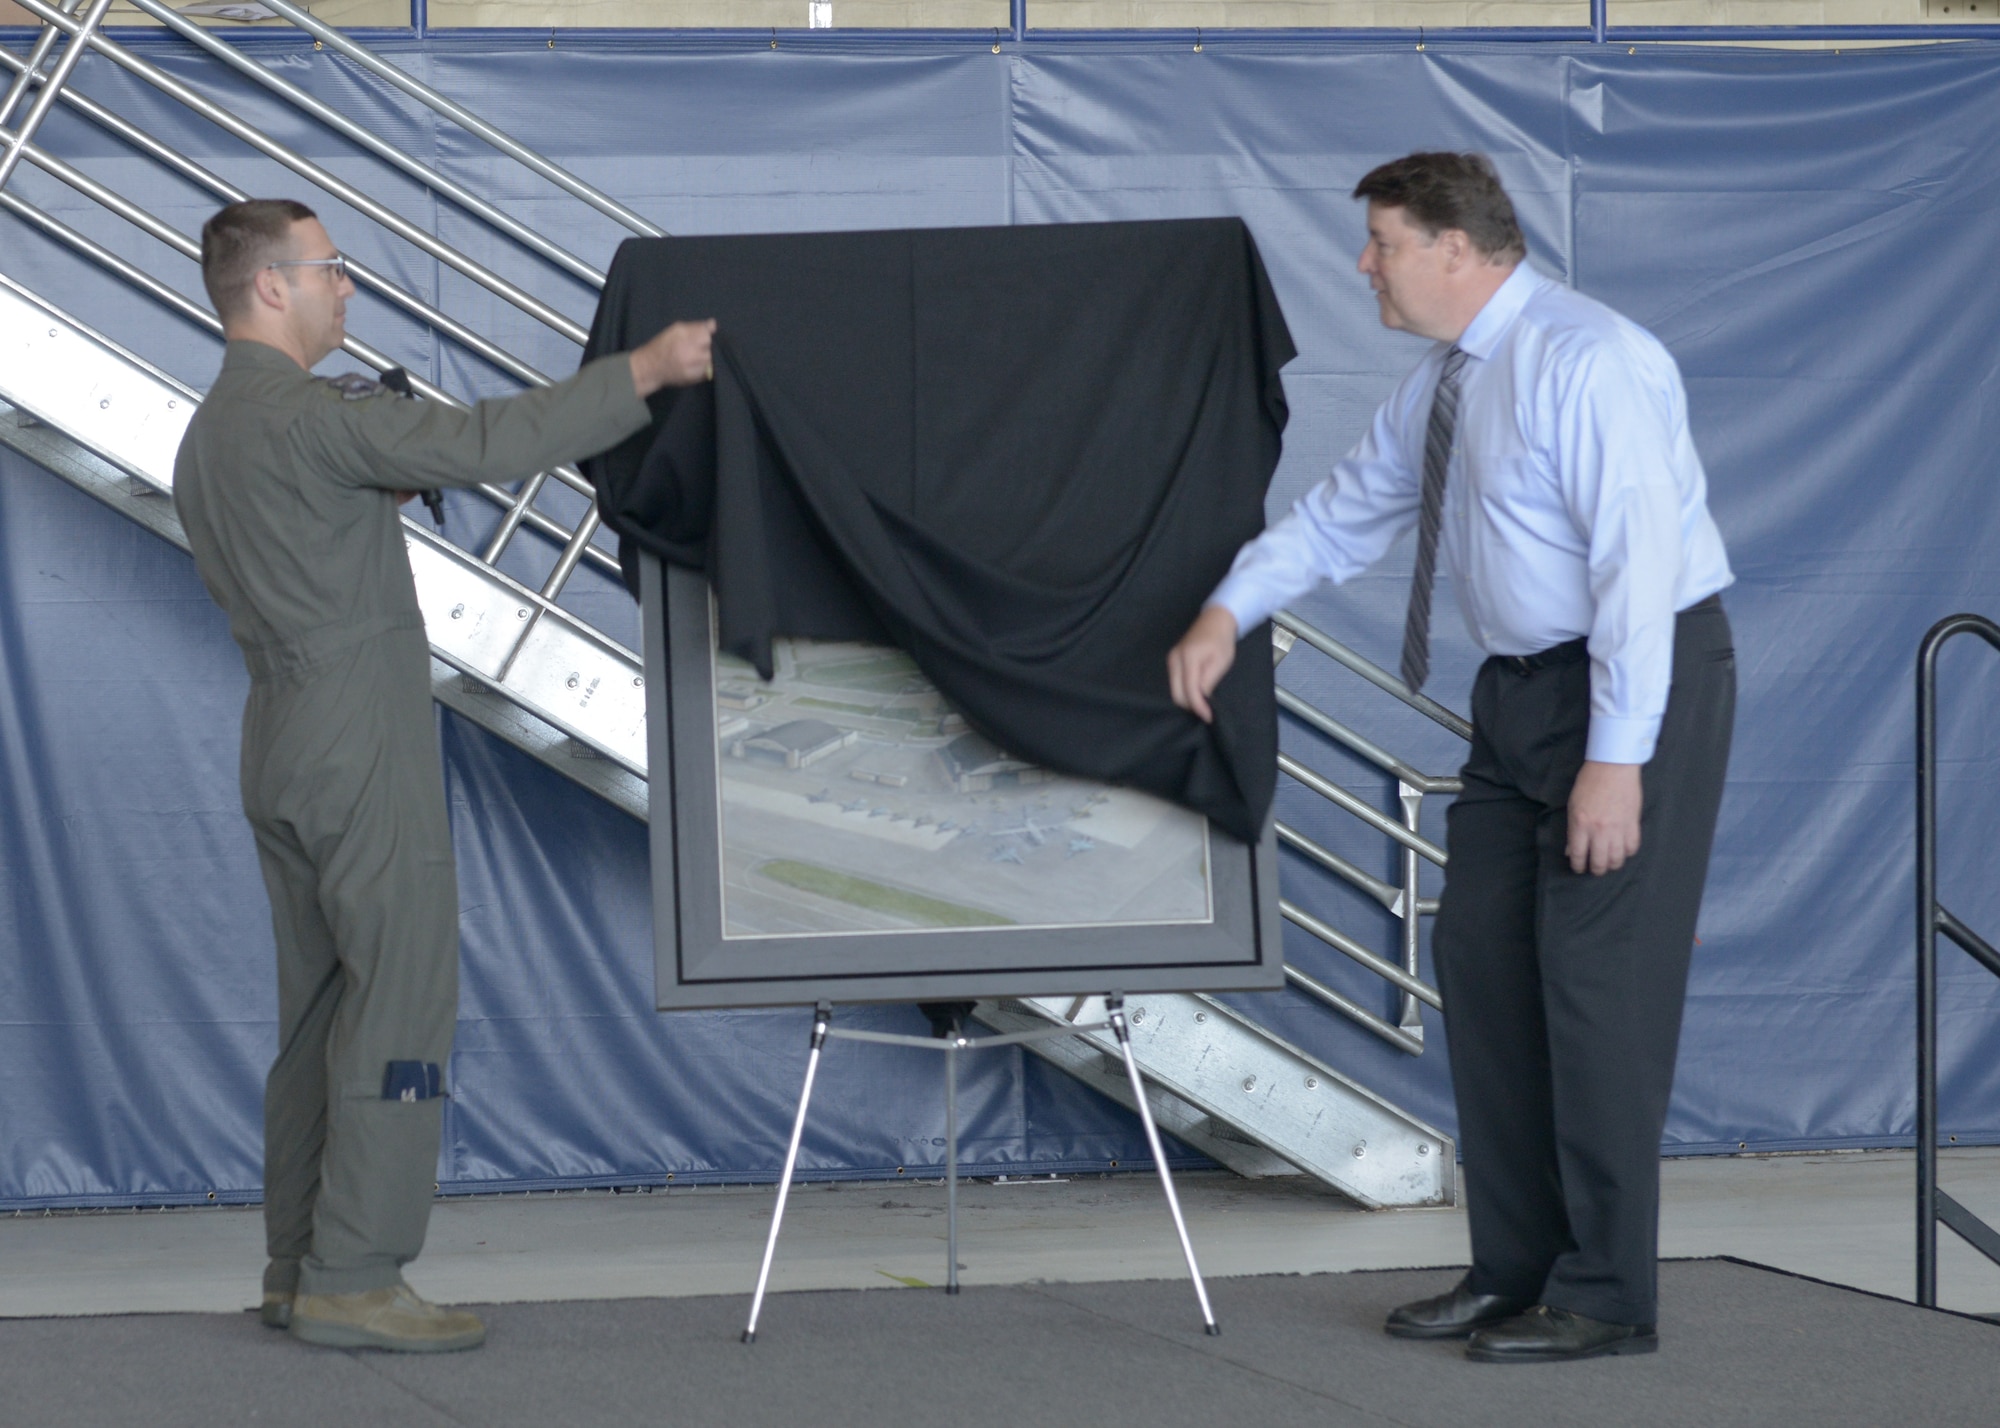 U.S. Air Force Col. Robert Davis, 3rd Wing commander, and John Hume, an artist, reveal a commemorative painting during the opening ceremony for the 3rd Wing’s 100th anniversary celebration on Joint Base Elmendorf-Richardson, Alaska, July 25, 2019.